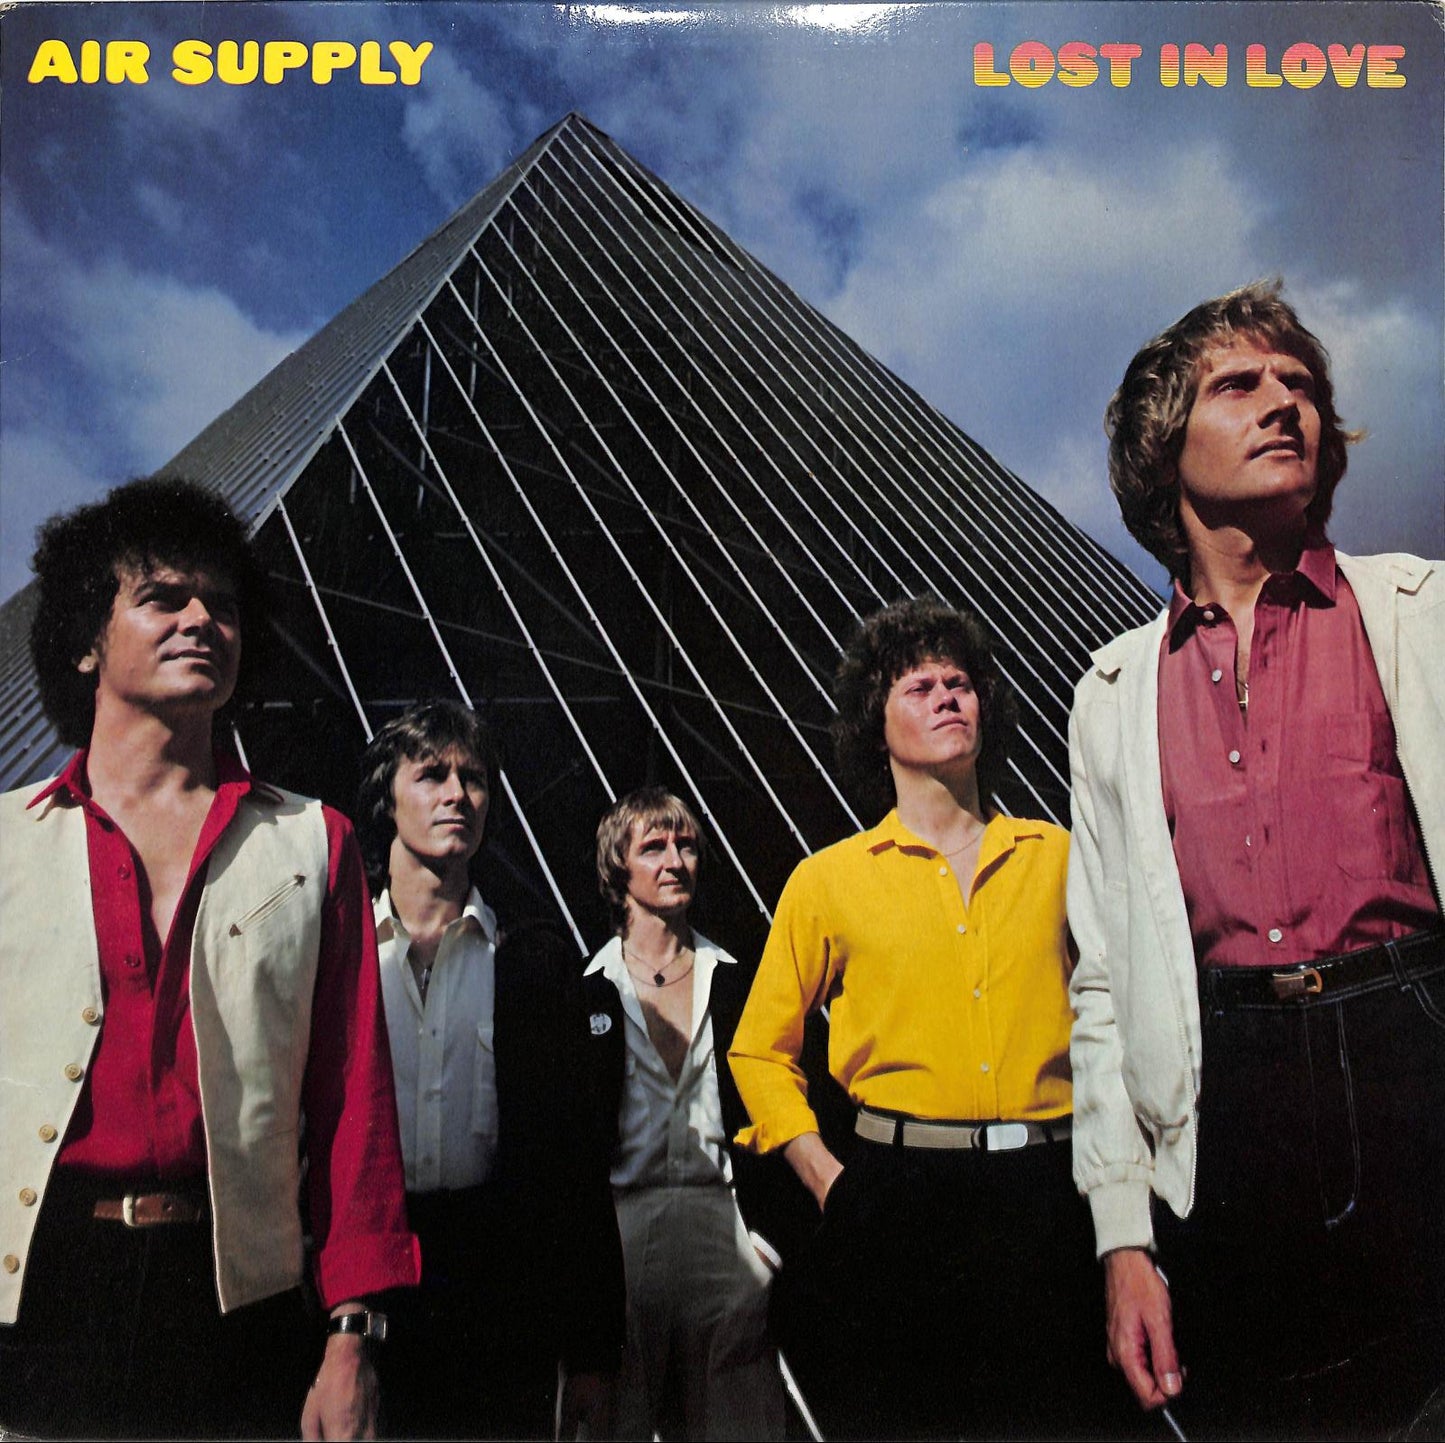 AIR SUPPLY - Lost In Love